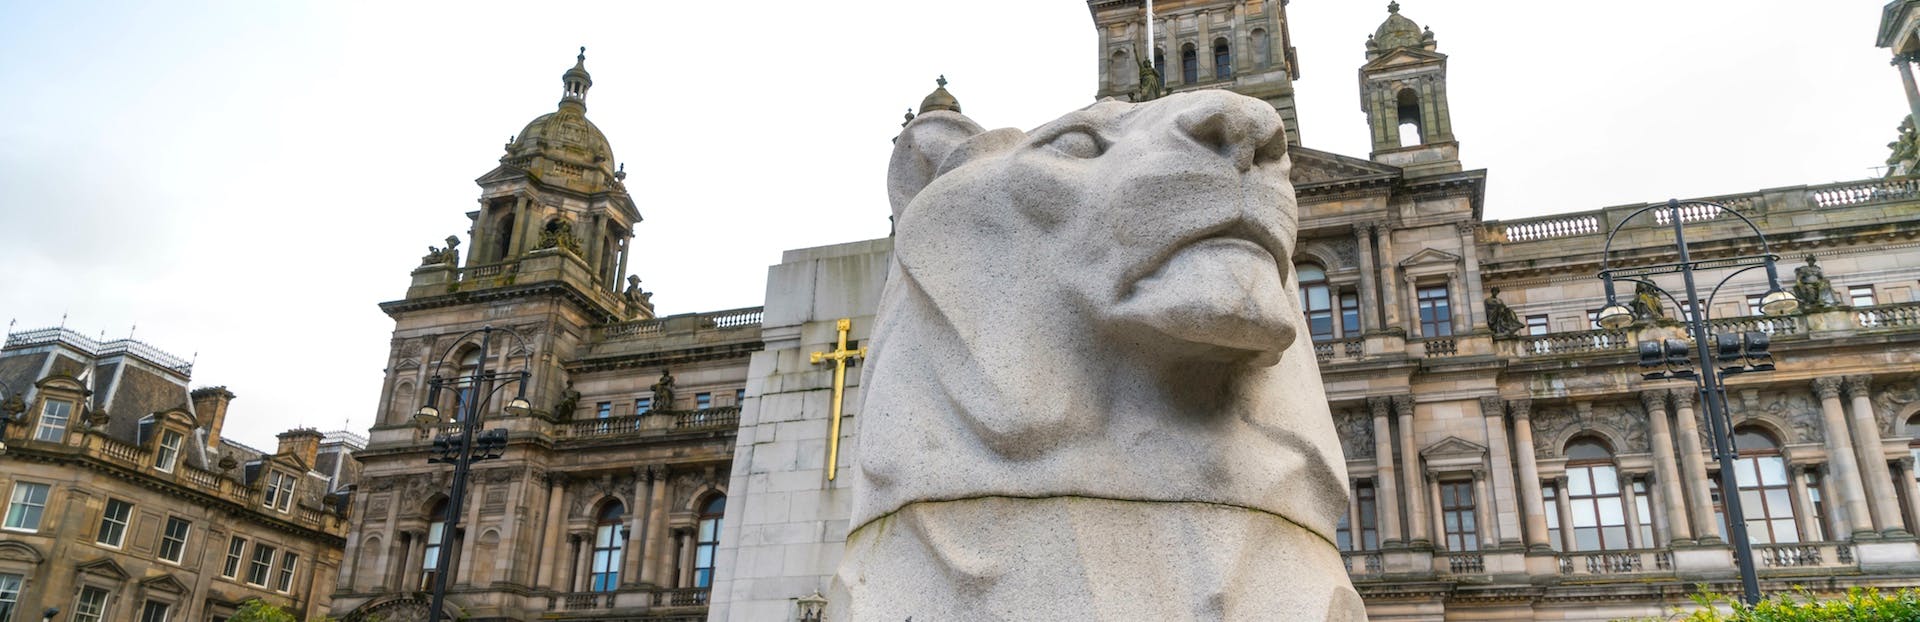 Discover the merchant city of Glasgow on a self-guided audio tour